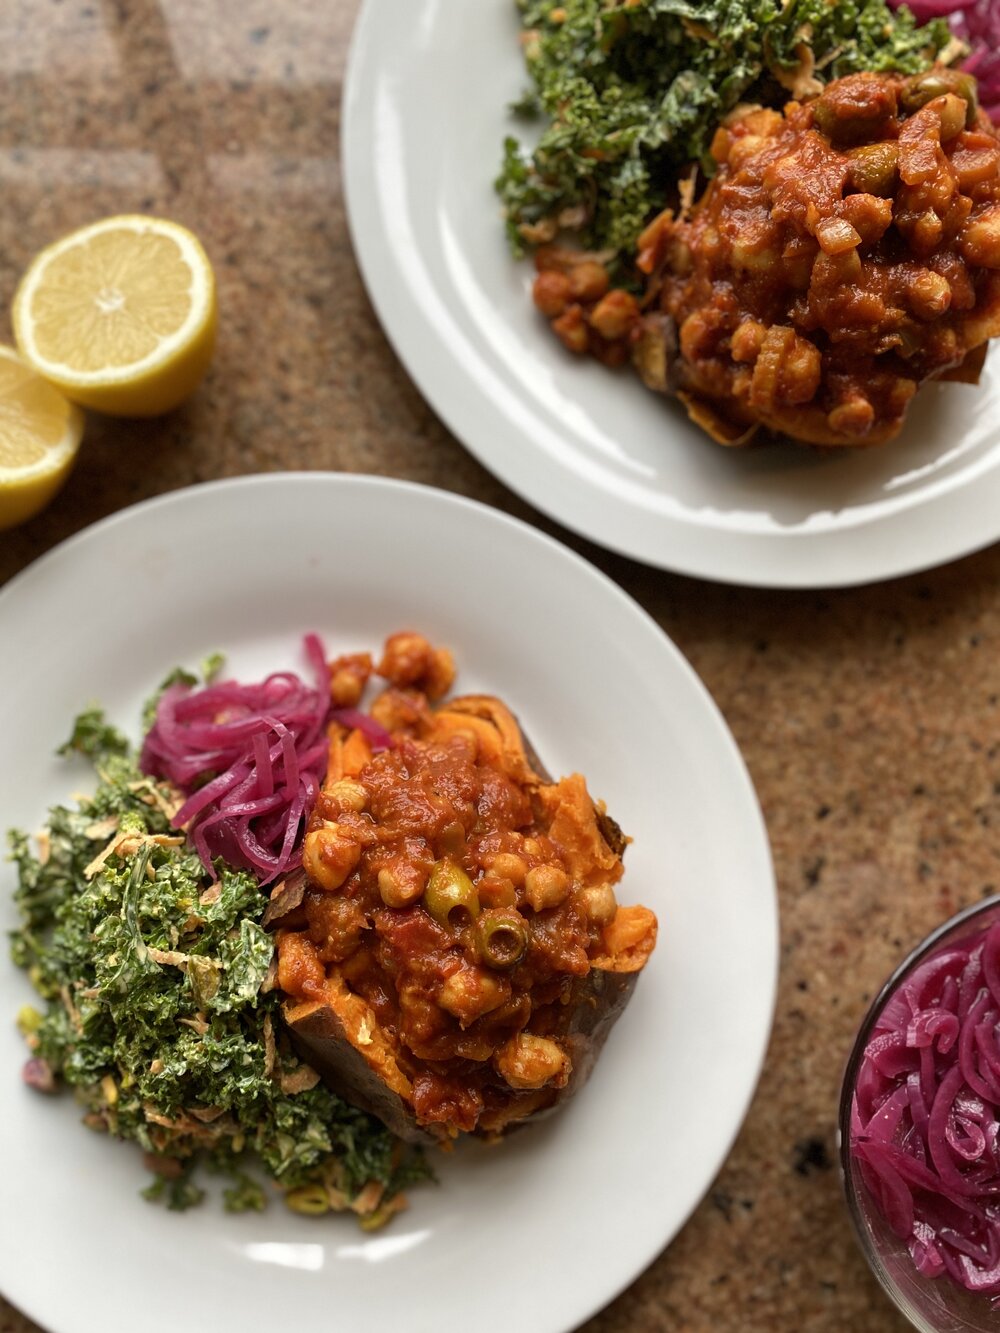 Two plates of baked sweet potatoes loaded with chickpea tagine